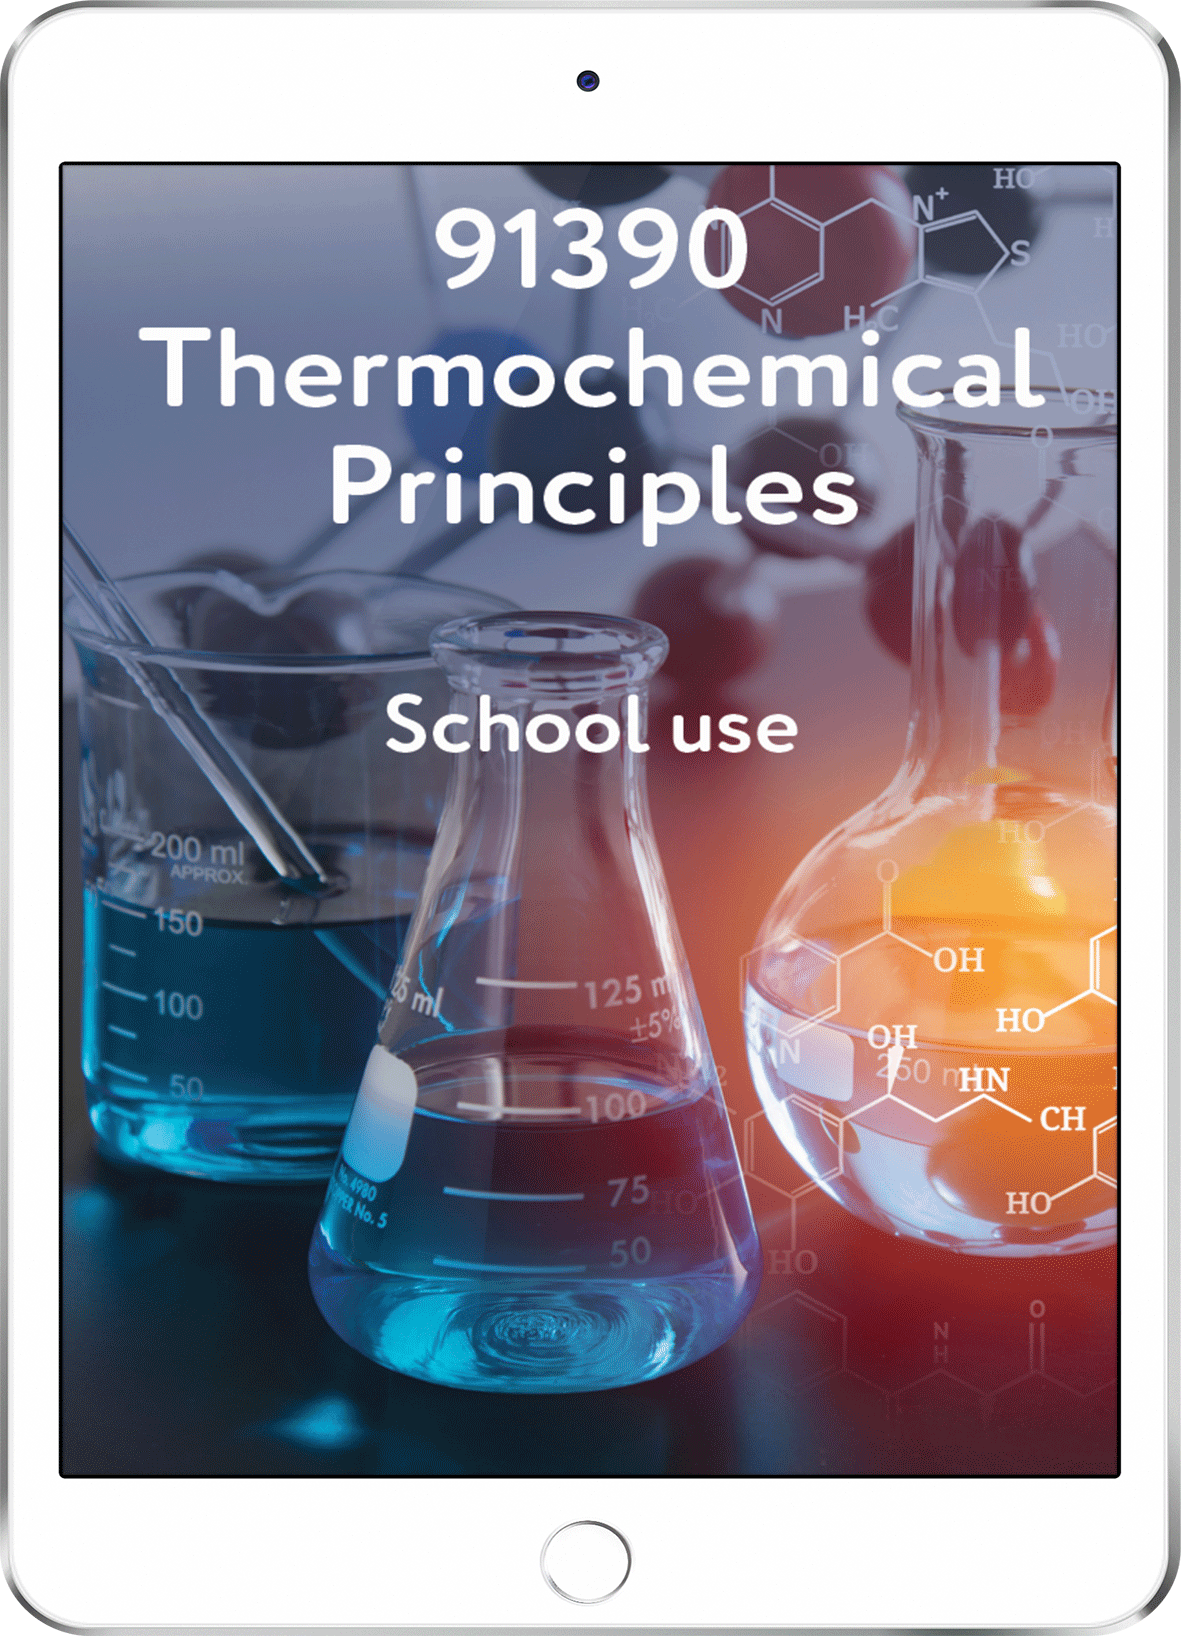 91390 Thermochemical Principles - School Use